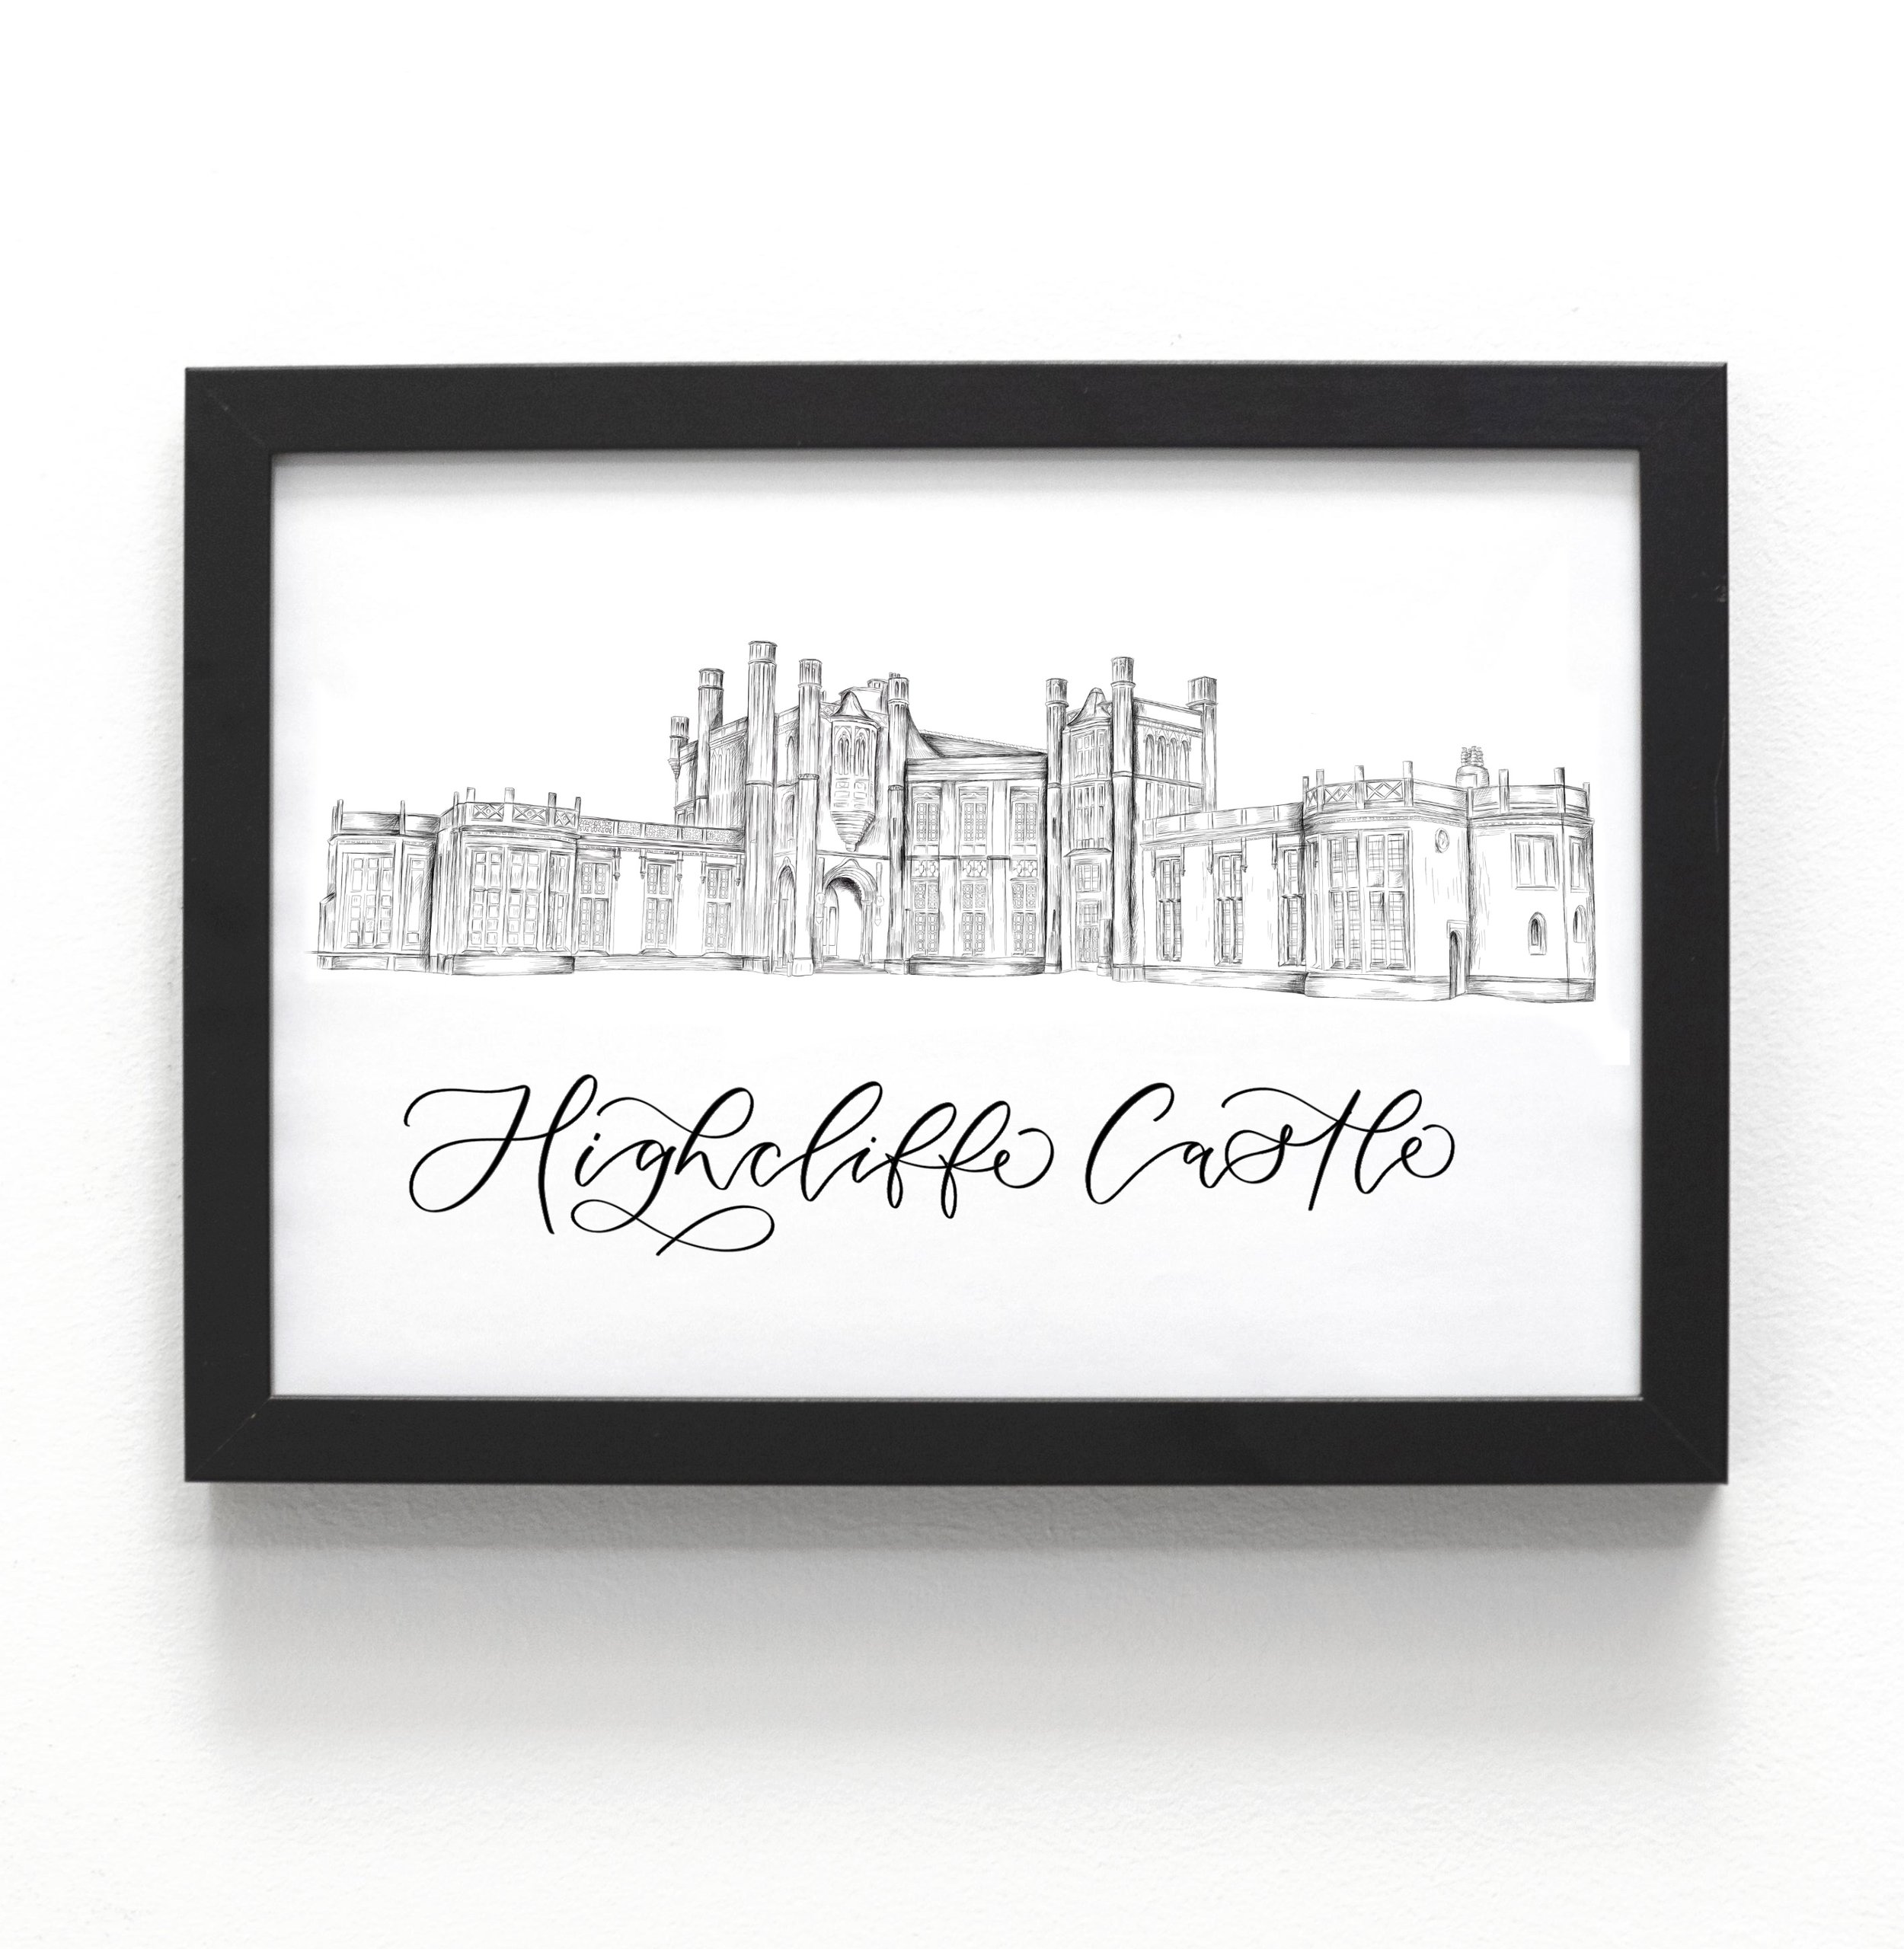 Highcliffe castle drawing - venue illustration of highcliffe castle by The Amyverse.jpeg